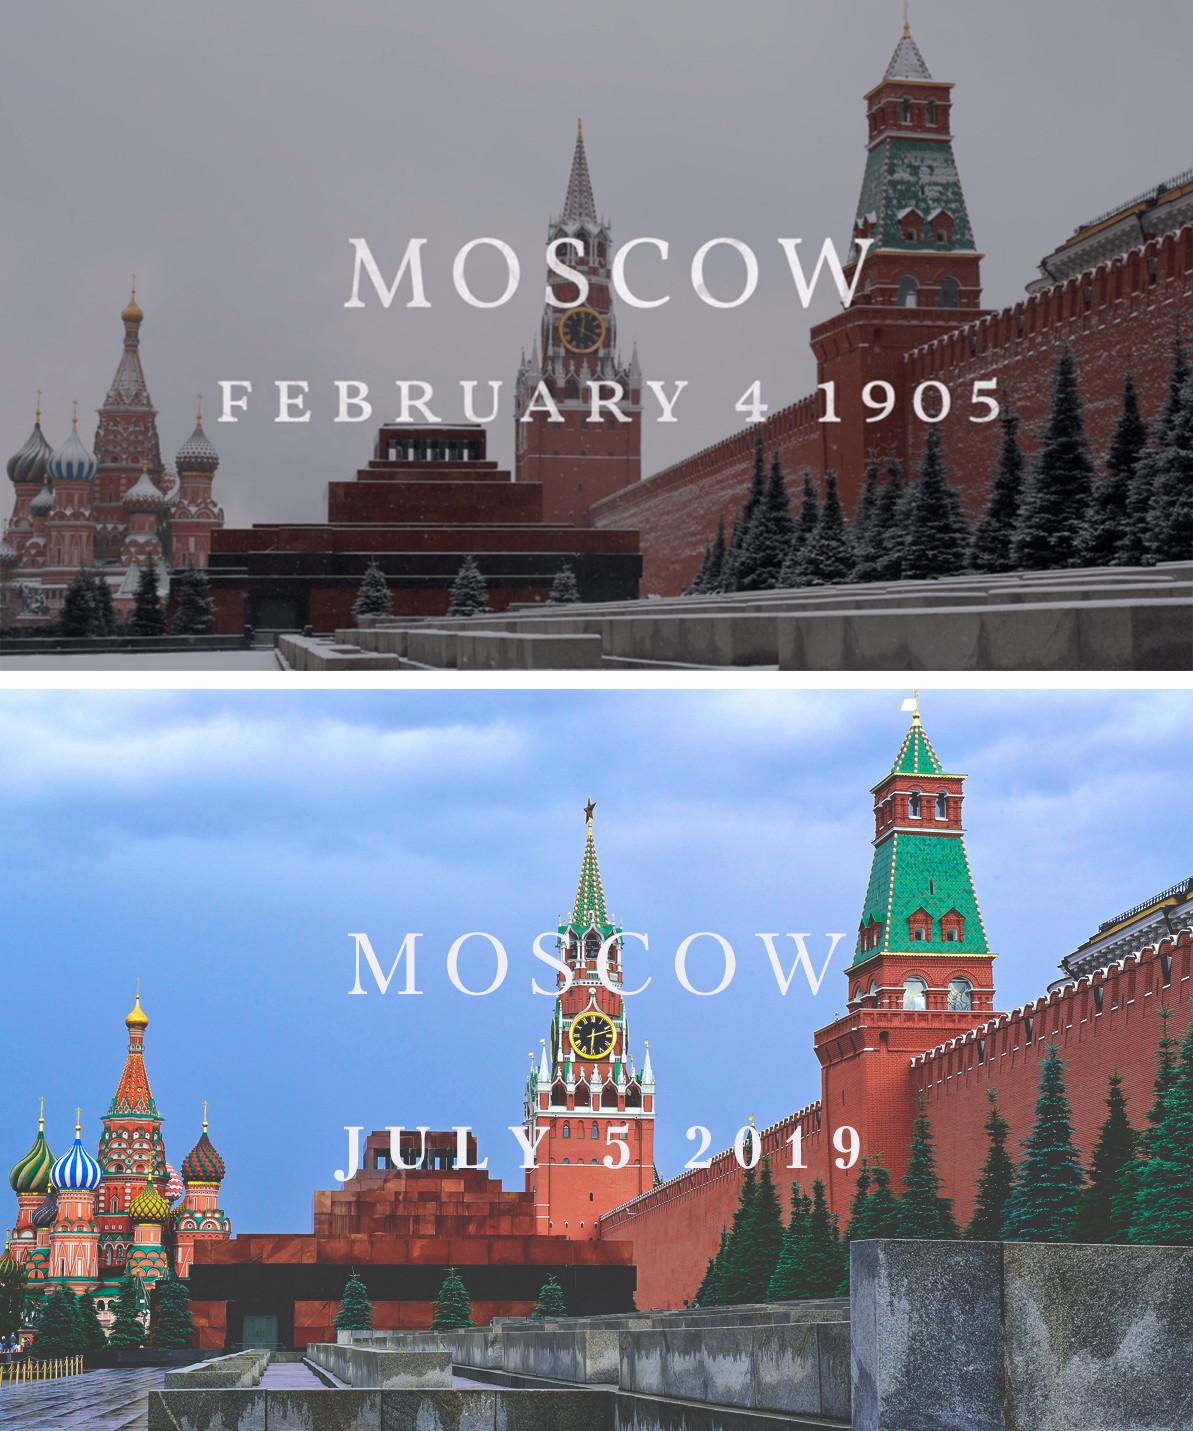 The above part is The Last Czars' actual screenshot while the below part mocks it - 'nothing has changed in 114 years!'